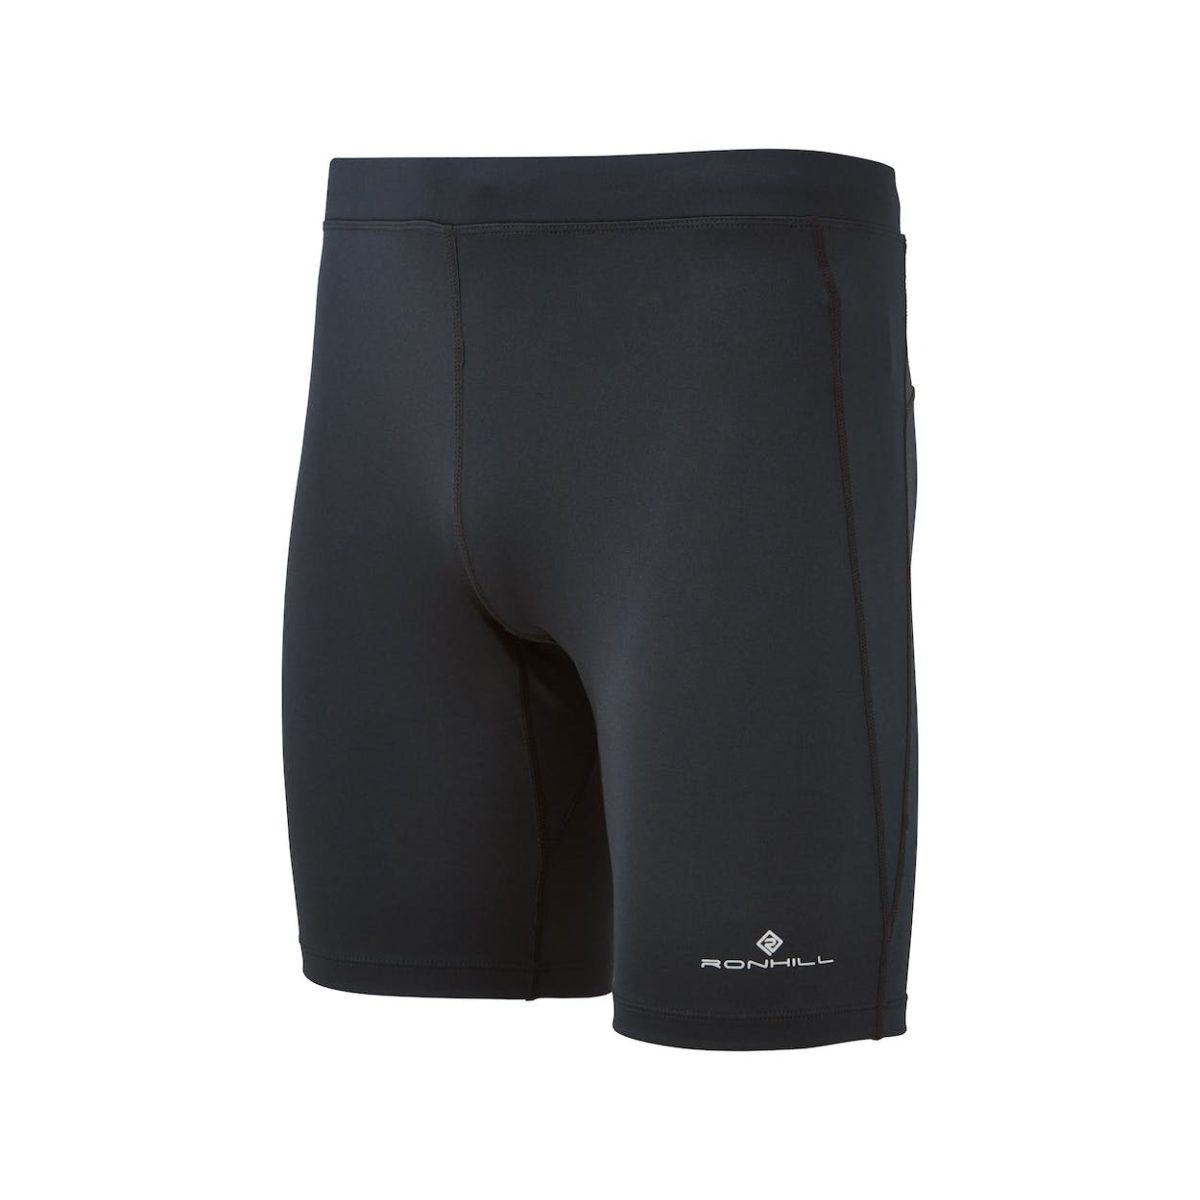 Ronhill MENS CORE SHORT @FastandLight for the nice price